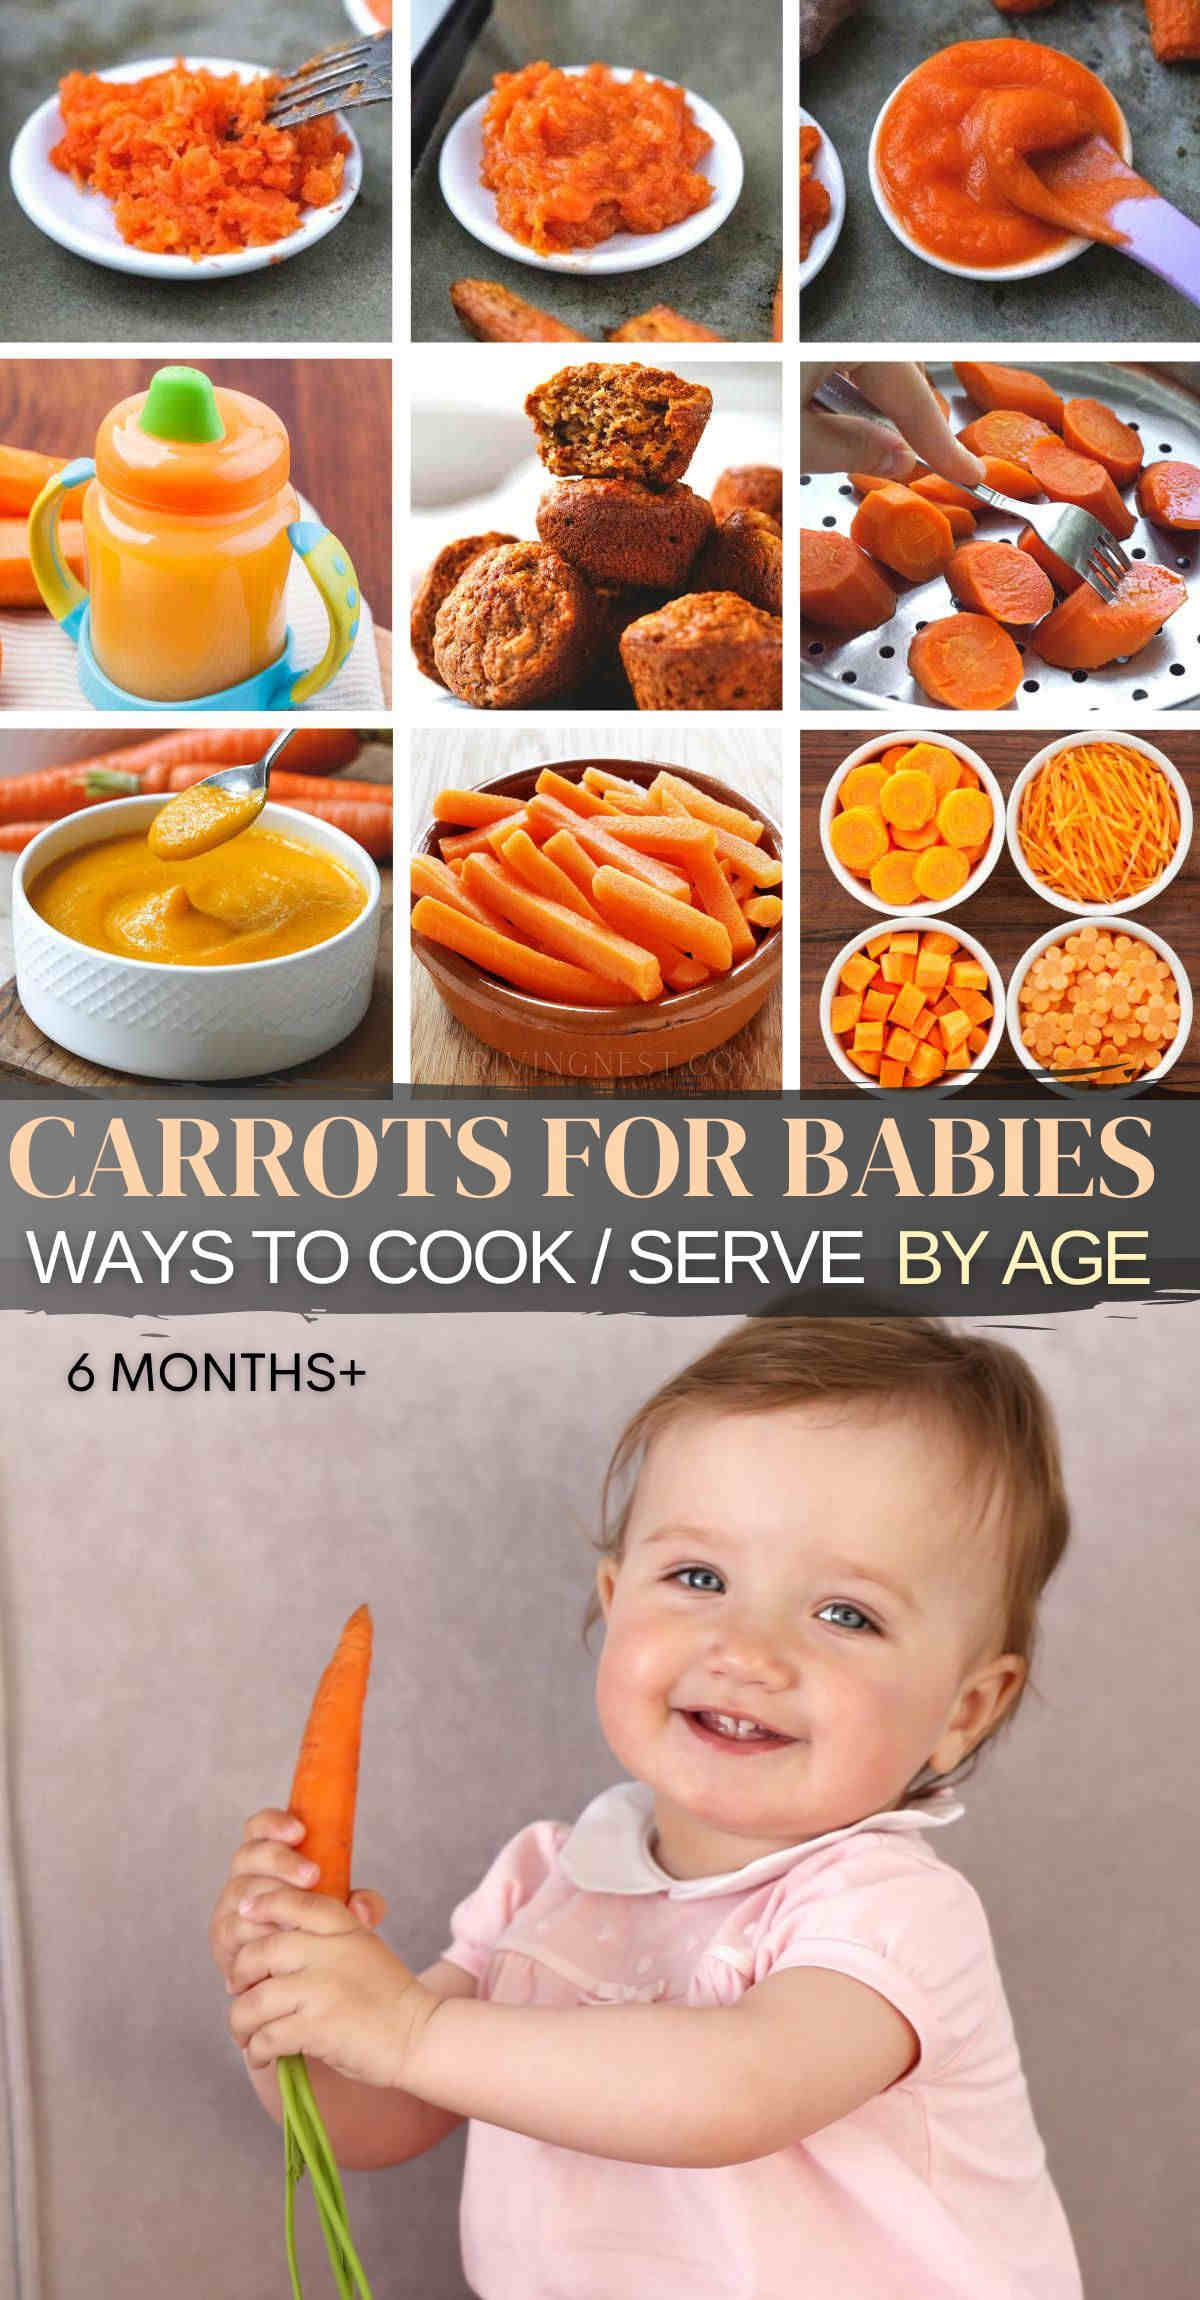 Learn how to prepare baby's first carrots beginning with 6 months of age whether they’re steamed, puréed, mashed, grated or roasted. How to serve as first solid baby food according to baby's age and needs. Plus the best way to cook carrots for babies (recipes) to retaining their nutrients, taste and texture. #carrotsforbabies #carrotsforbaby #carrotbabyfood #carrotbabyrecipes #carrotbabyfood #carrotblw #blw